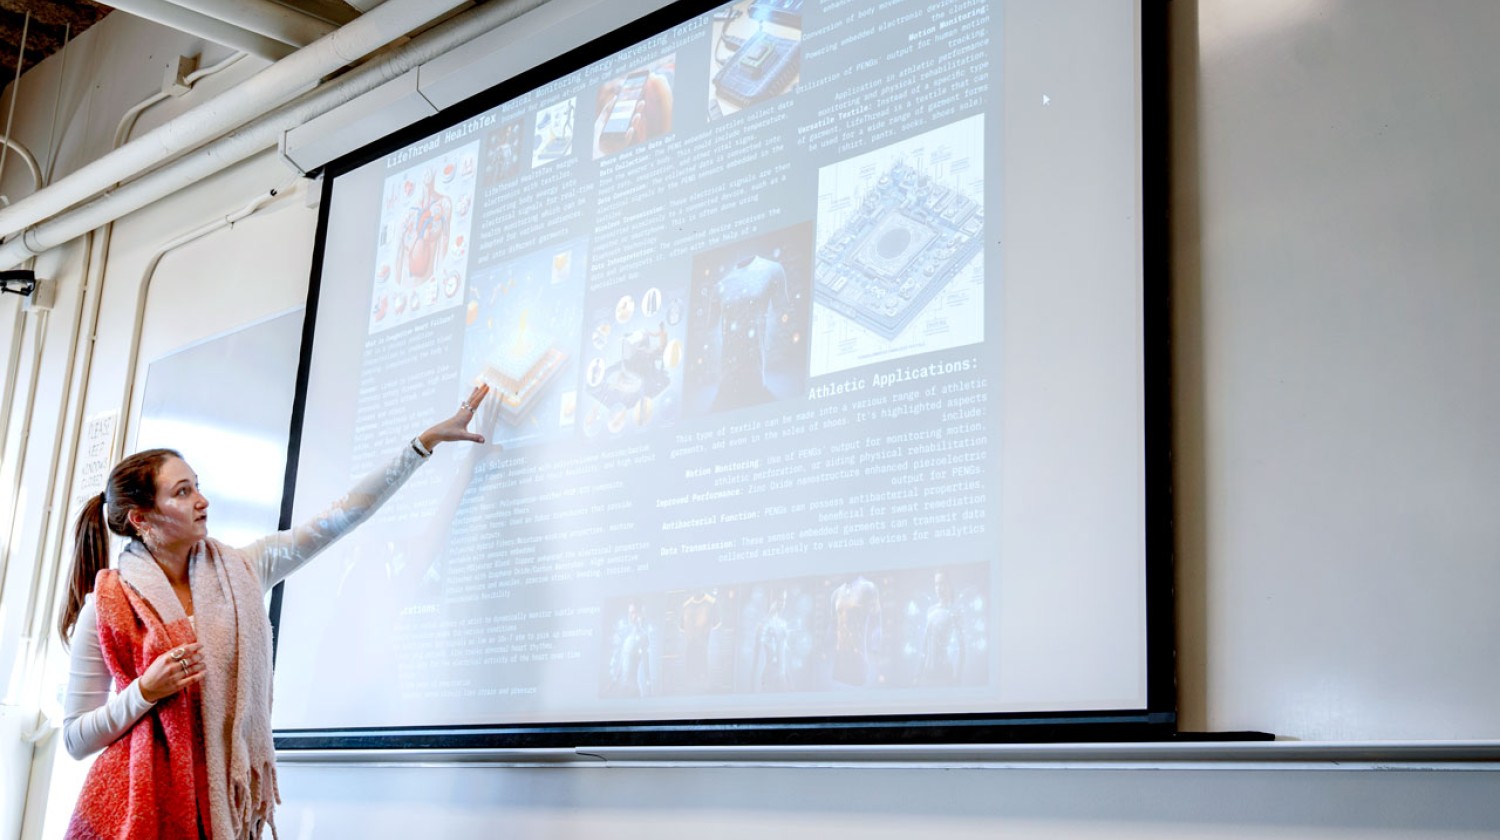 Grace Honeyman ’26 describes her final project, made with AI, for Prof. Juan Hinestroza’s class “Textiles, Apparel and Innovation Design” in fall 2023.